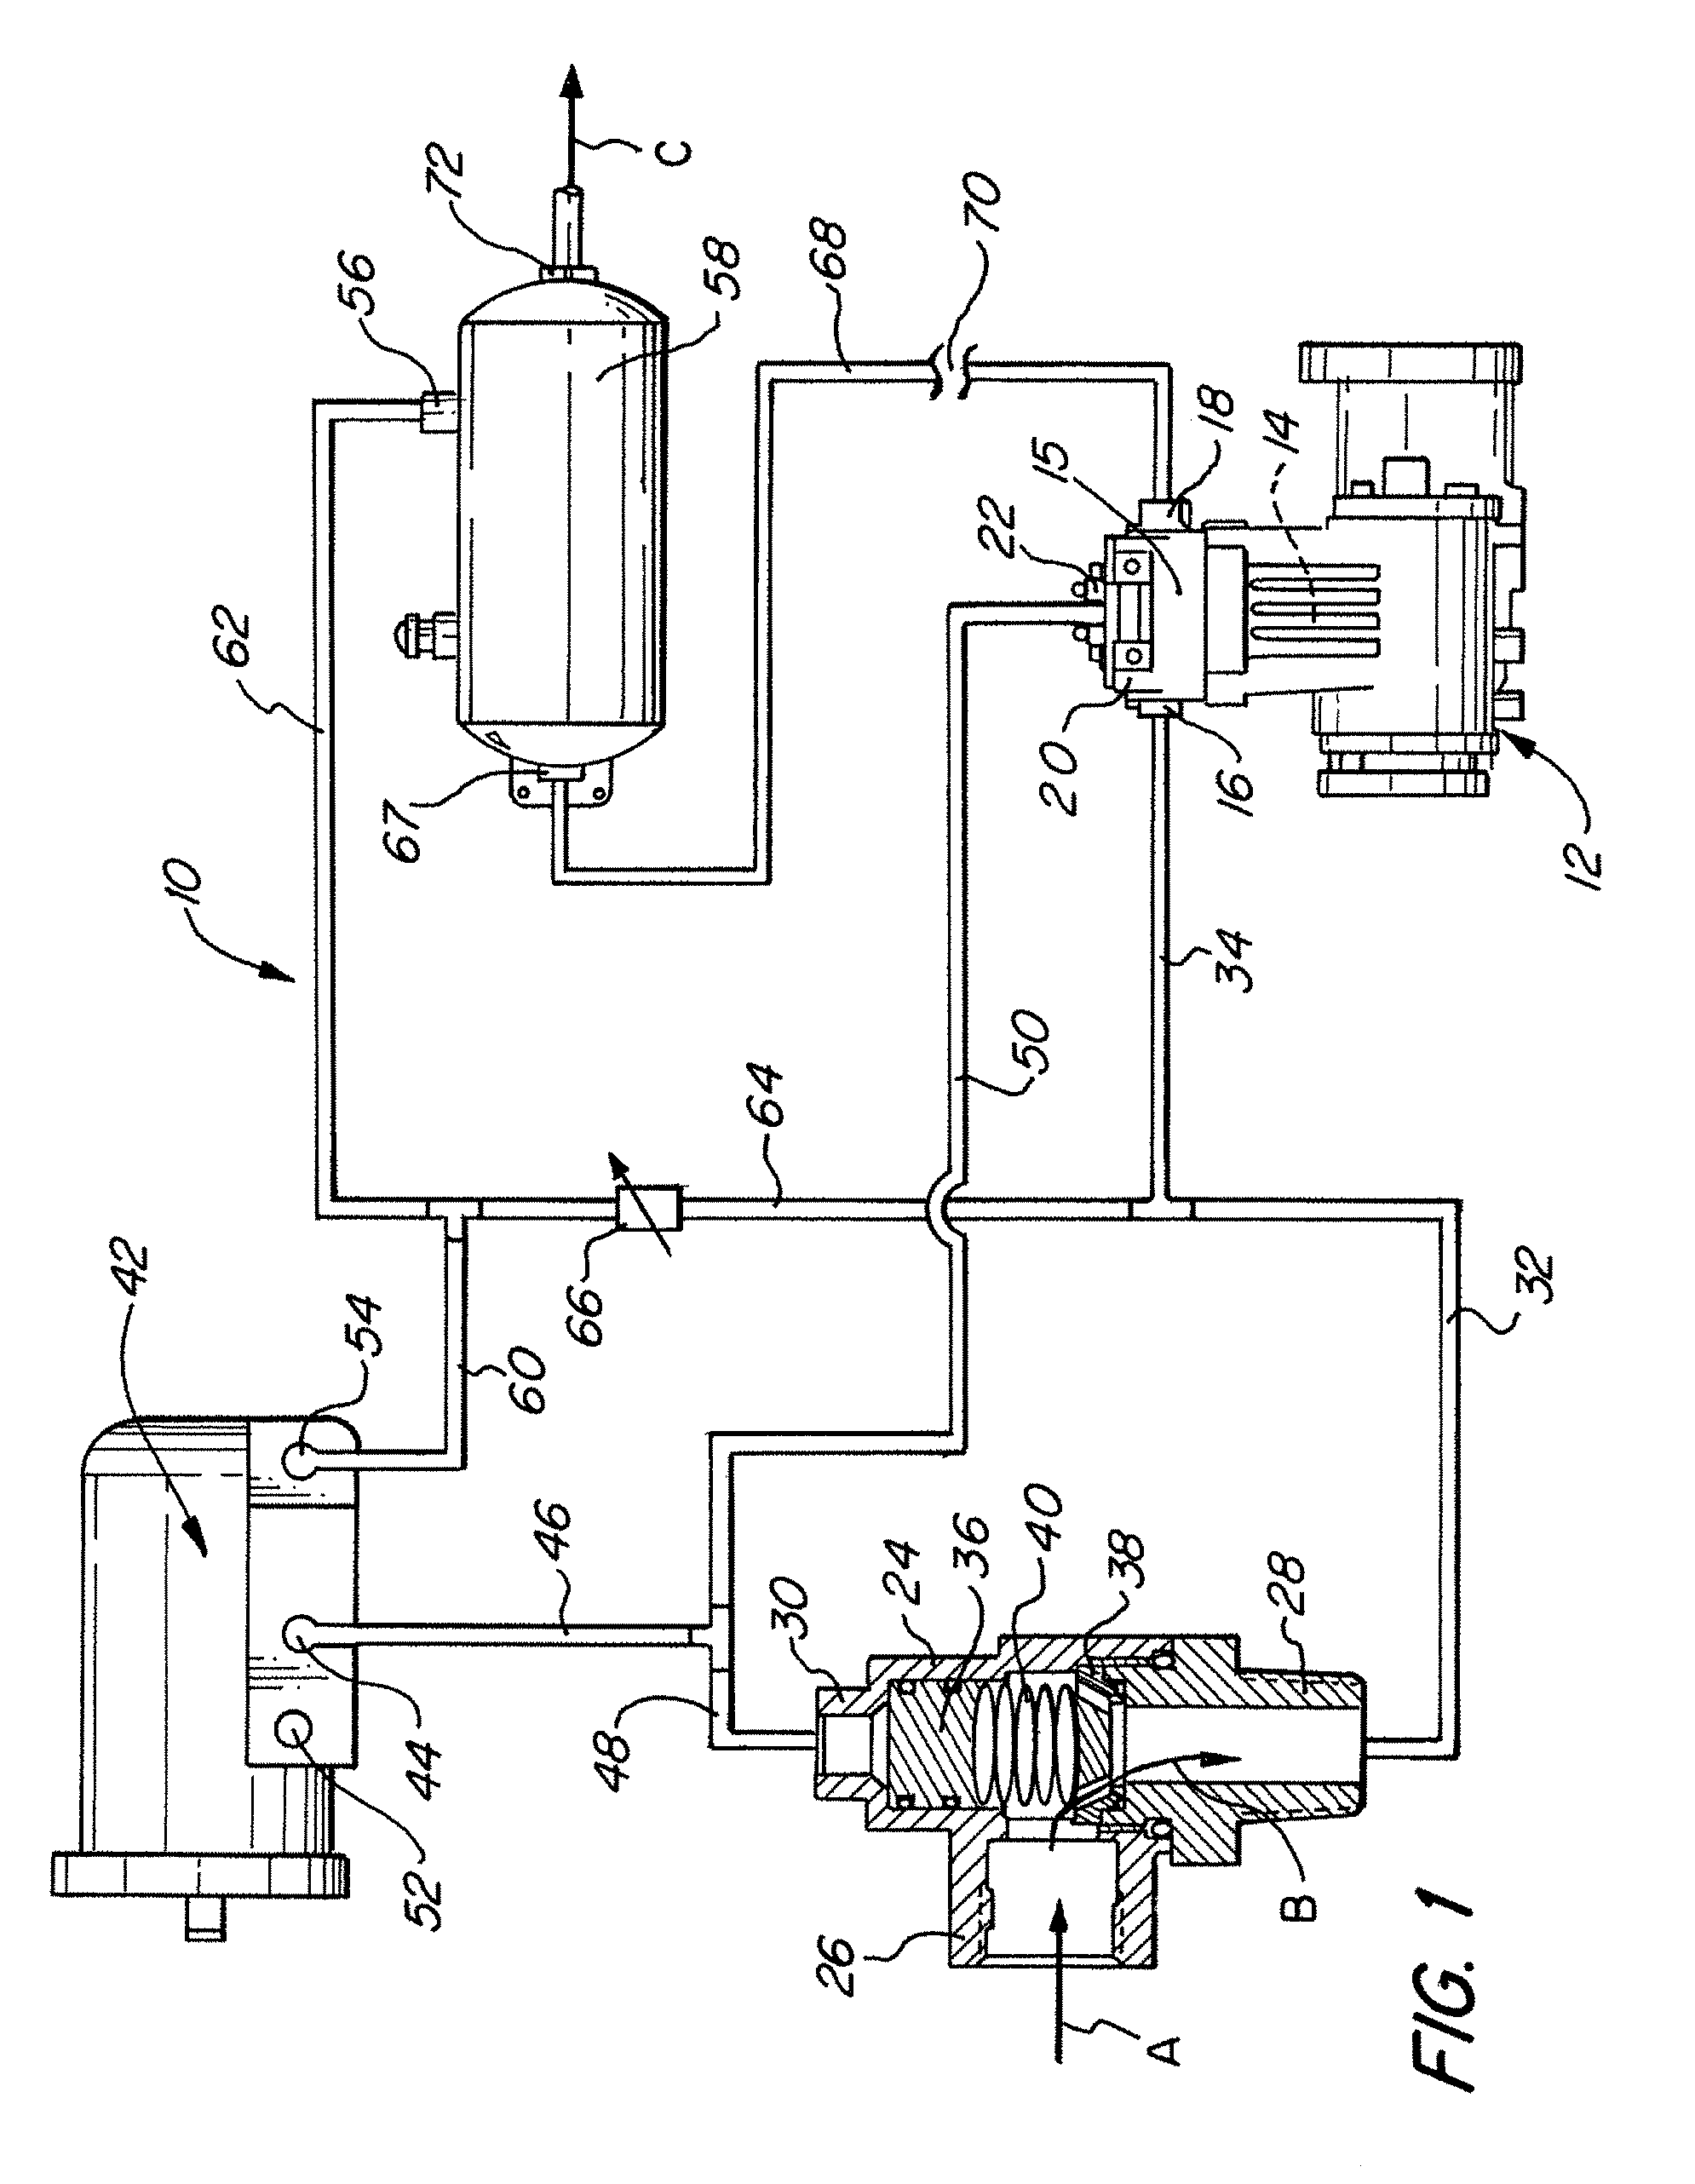 Air supply system with reduced oil passing in compressor